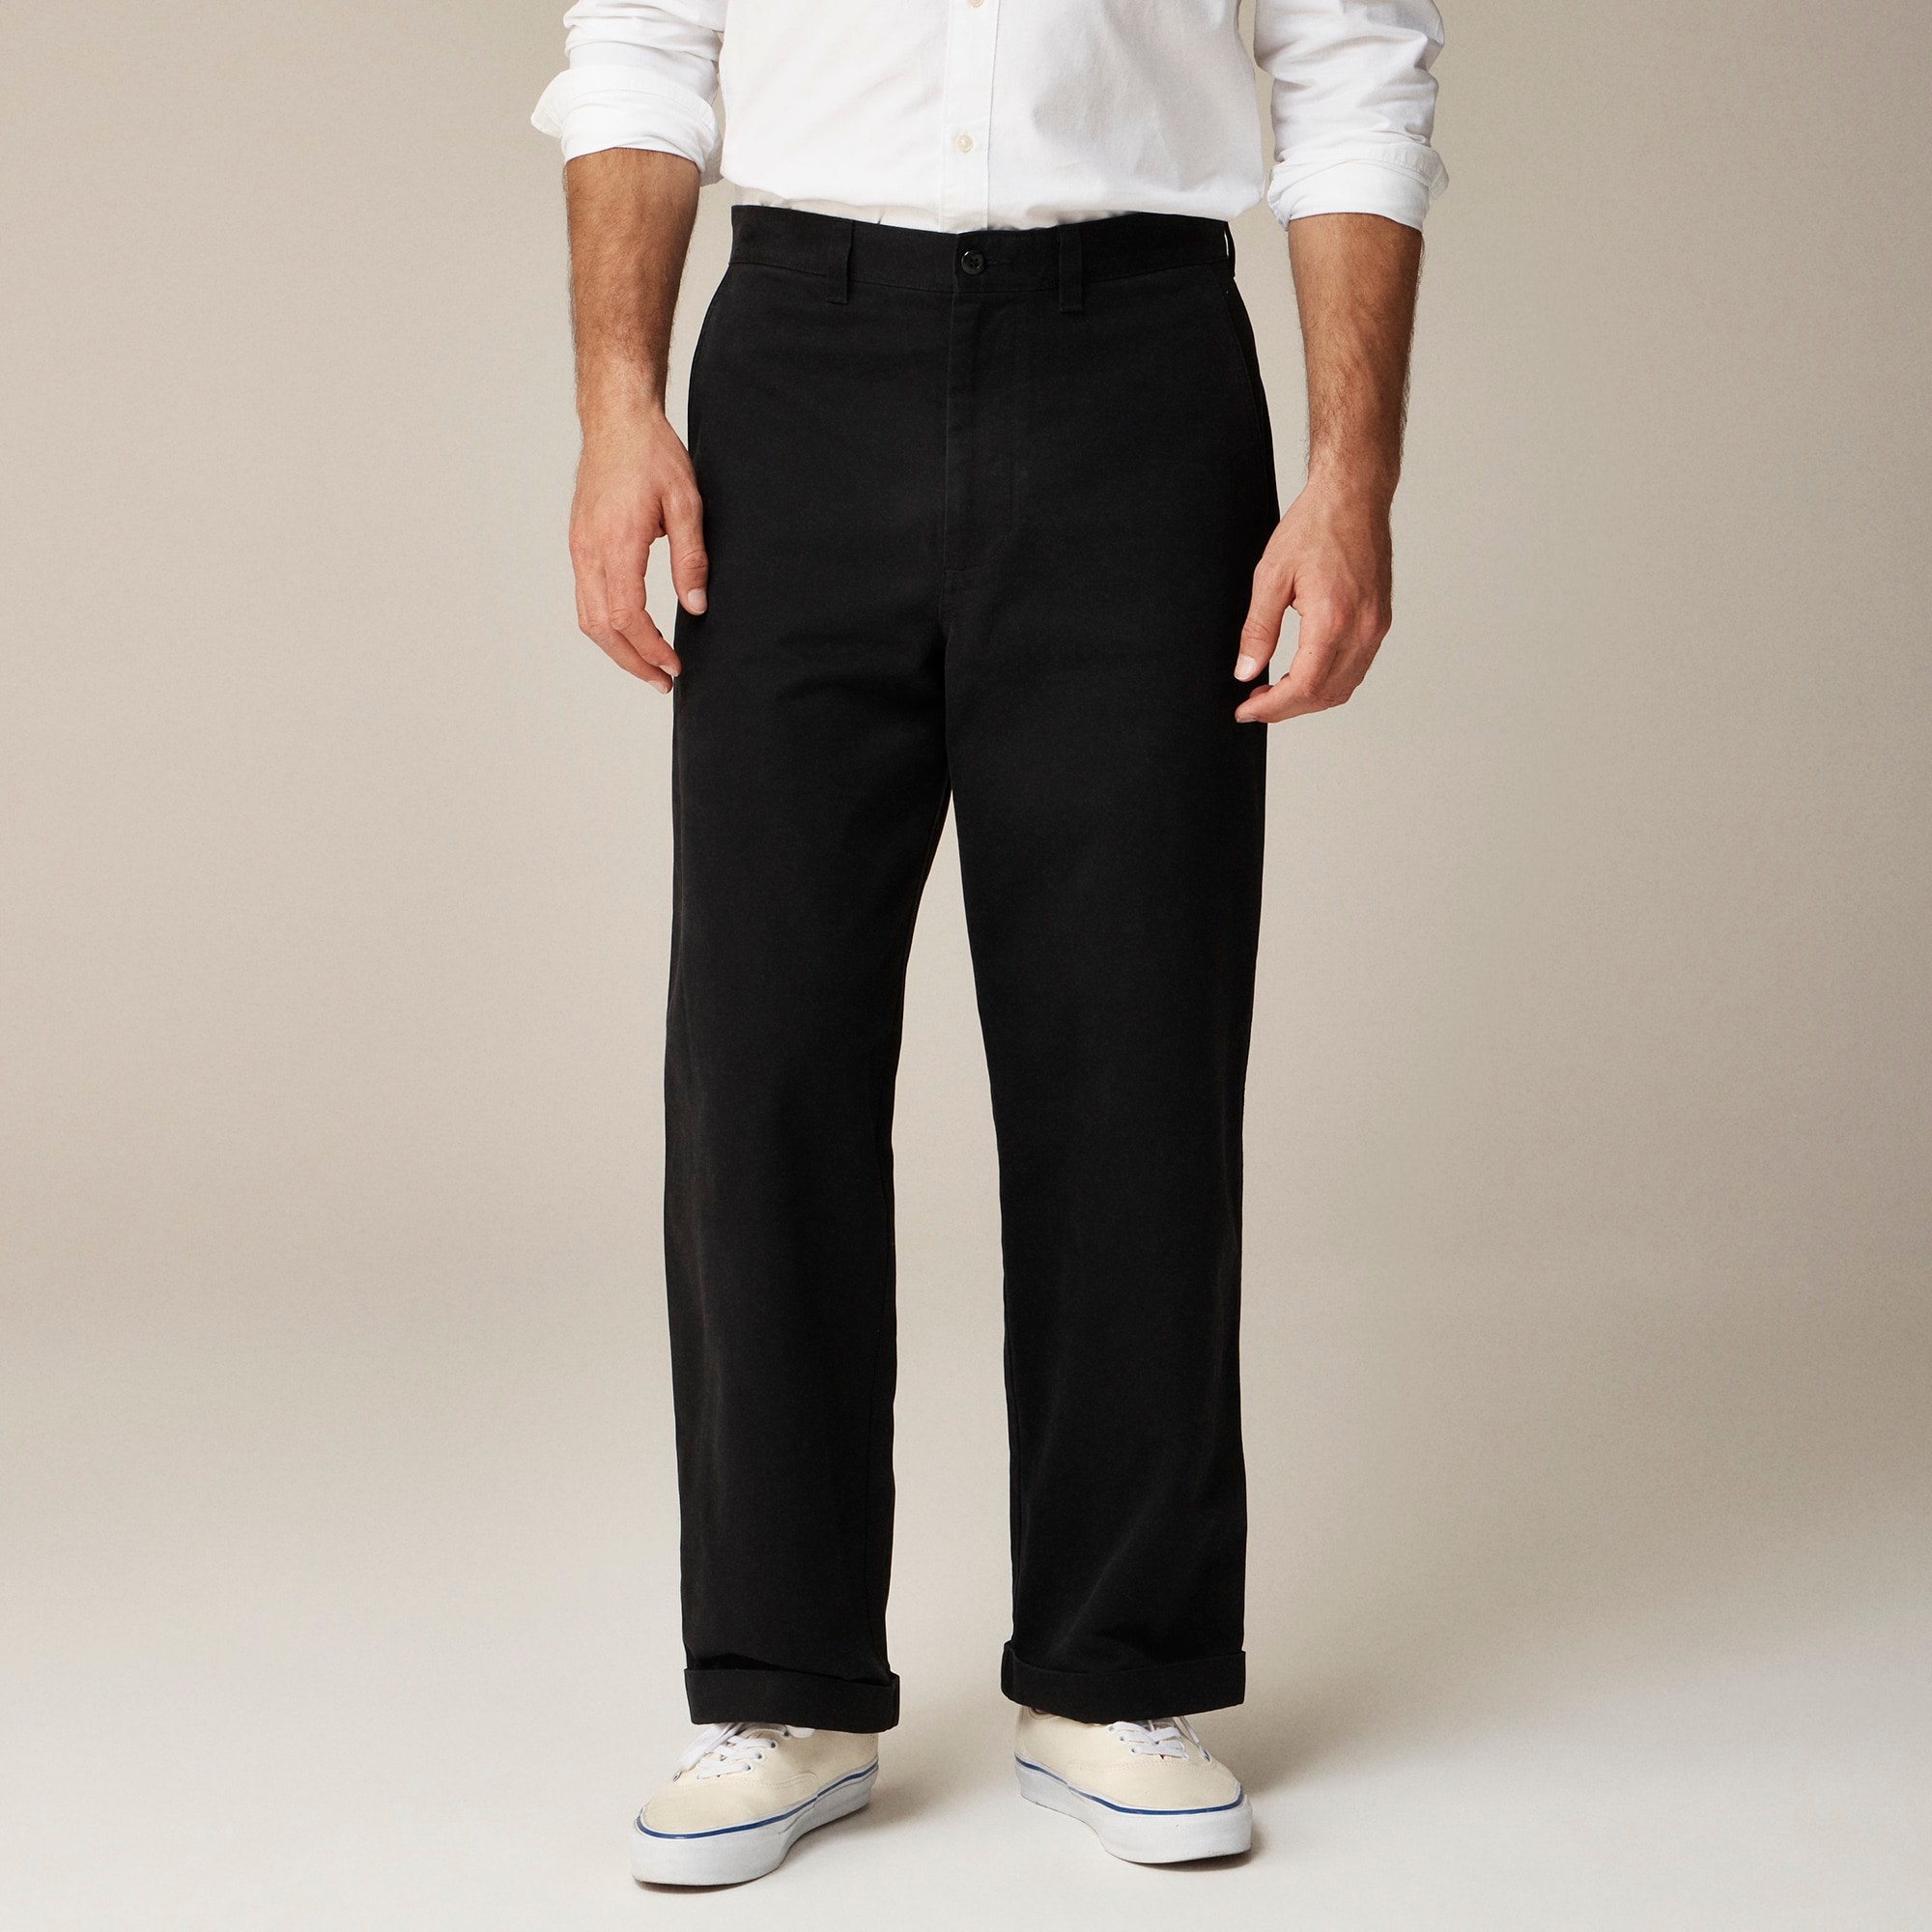  Giant-fit chino pant